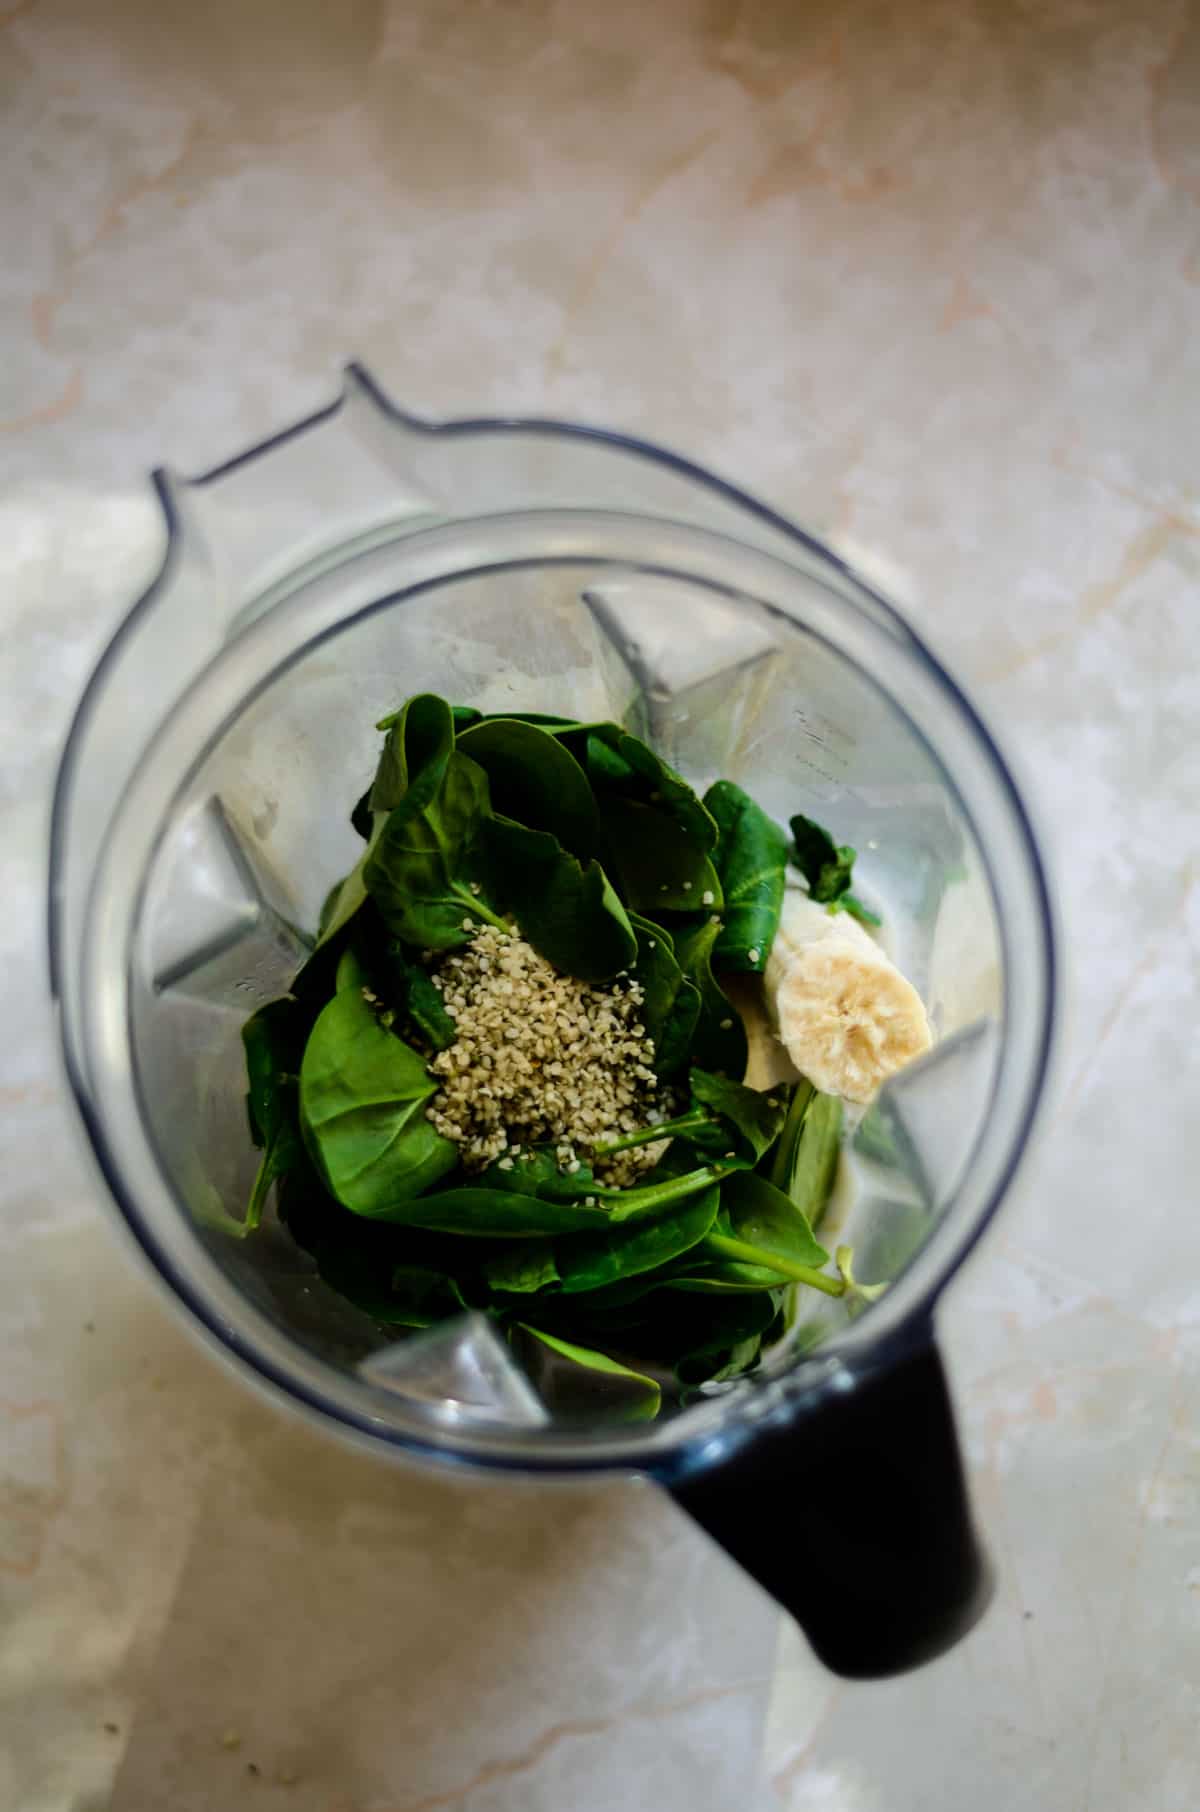 Banana, spinach, seeds, milk, in blender container for a smoothie.